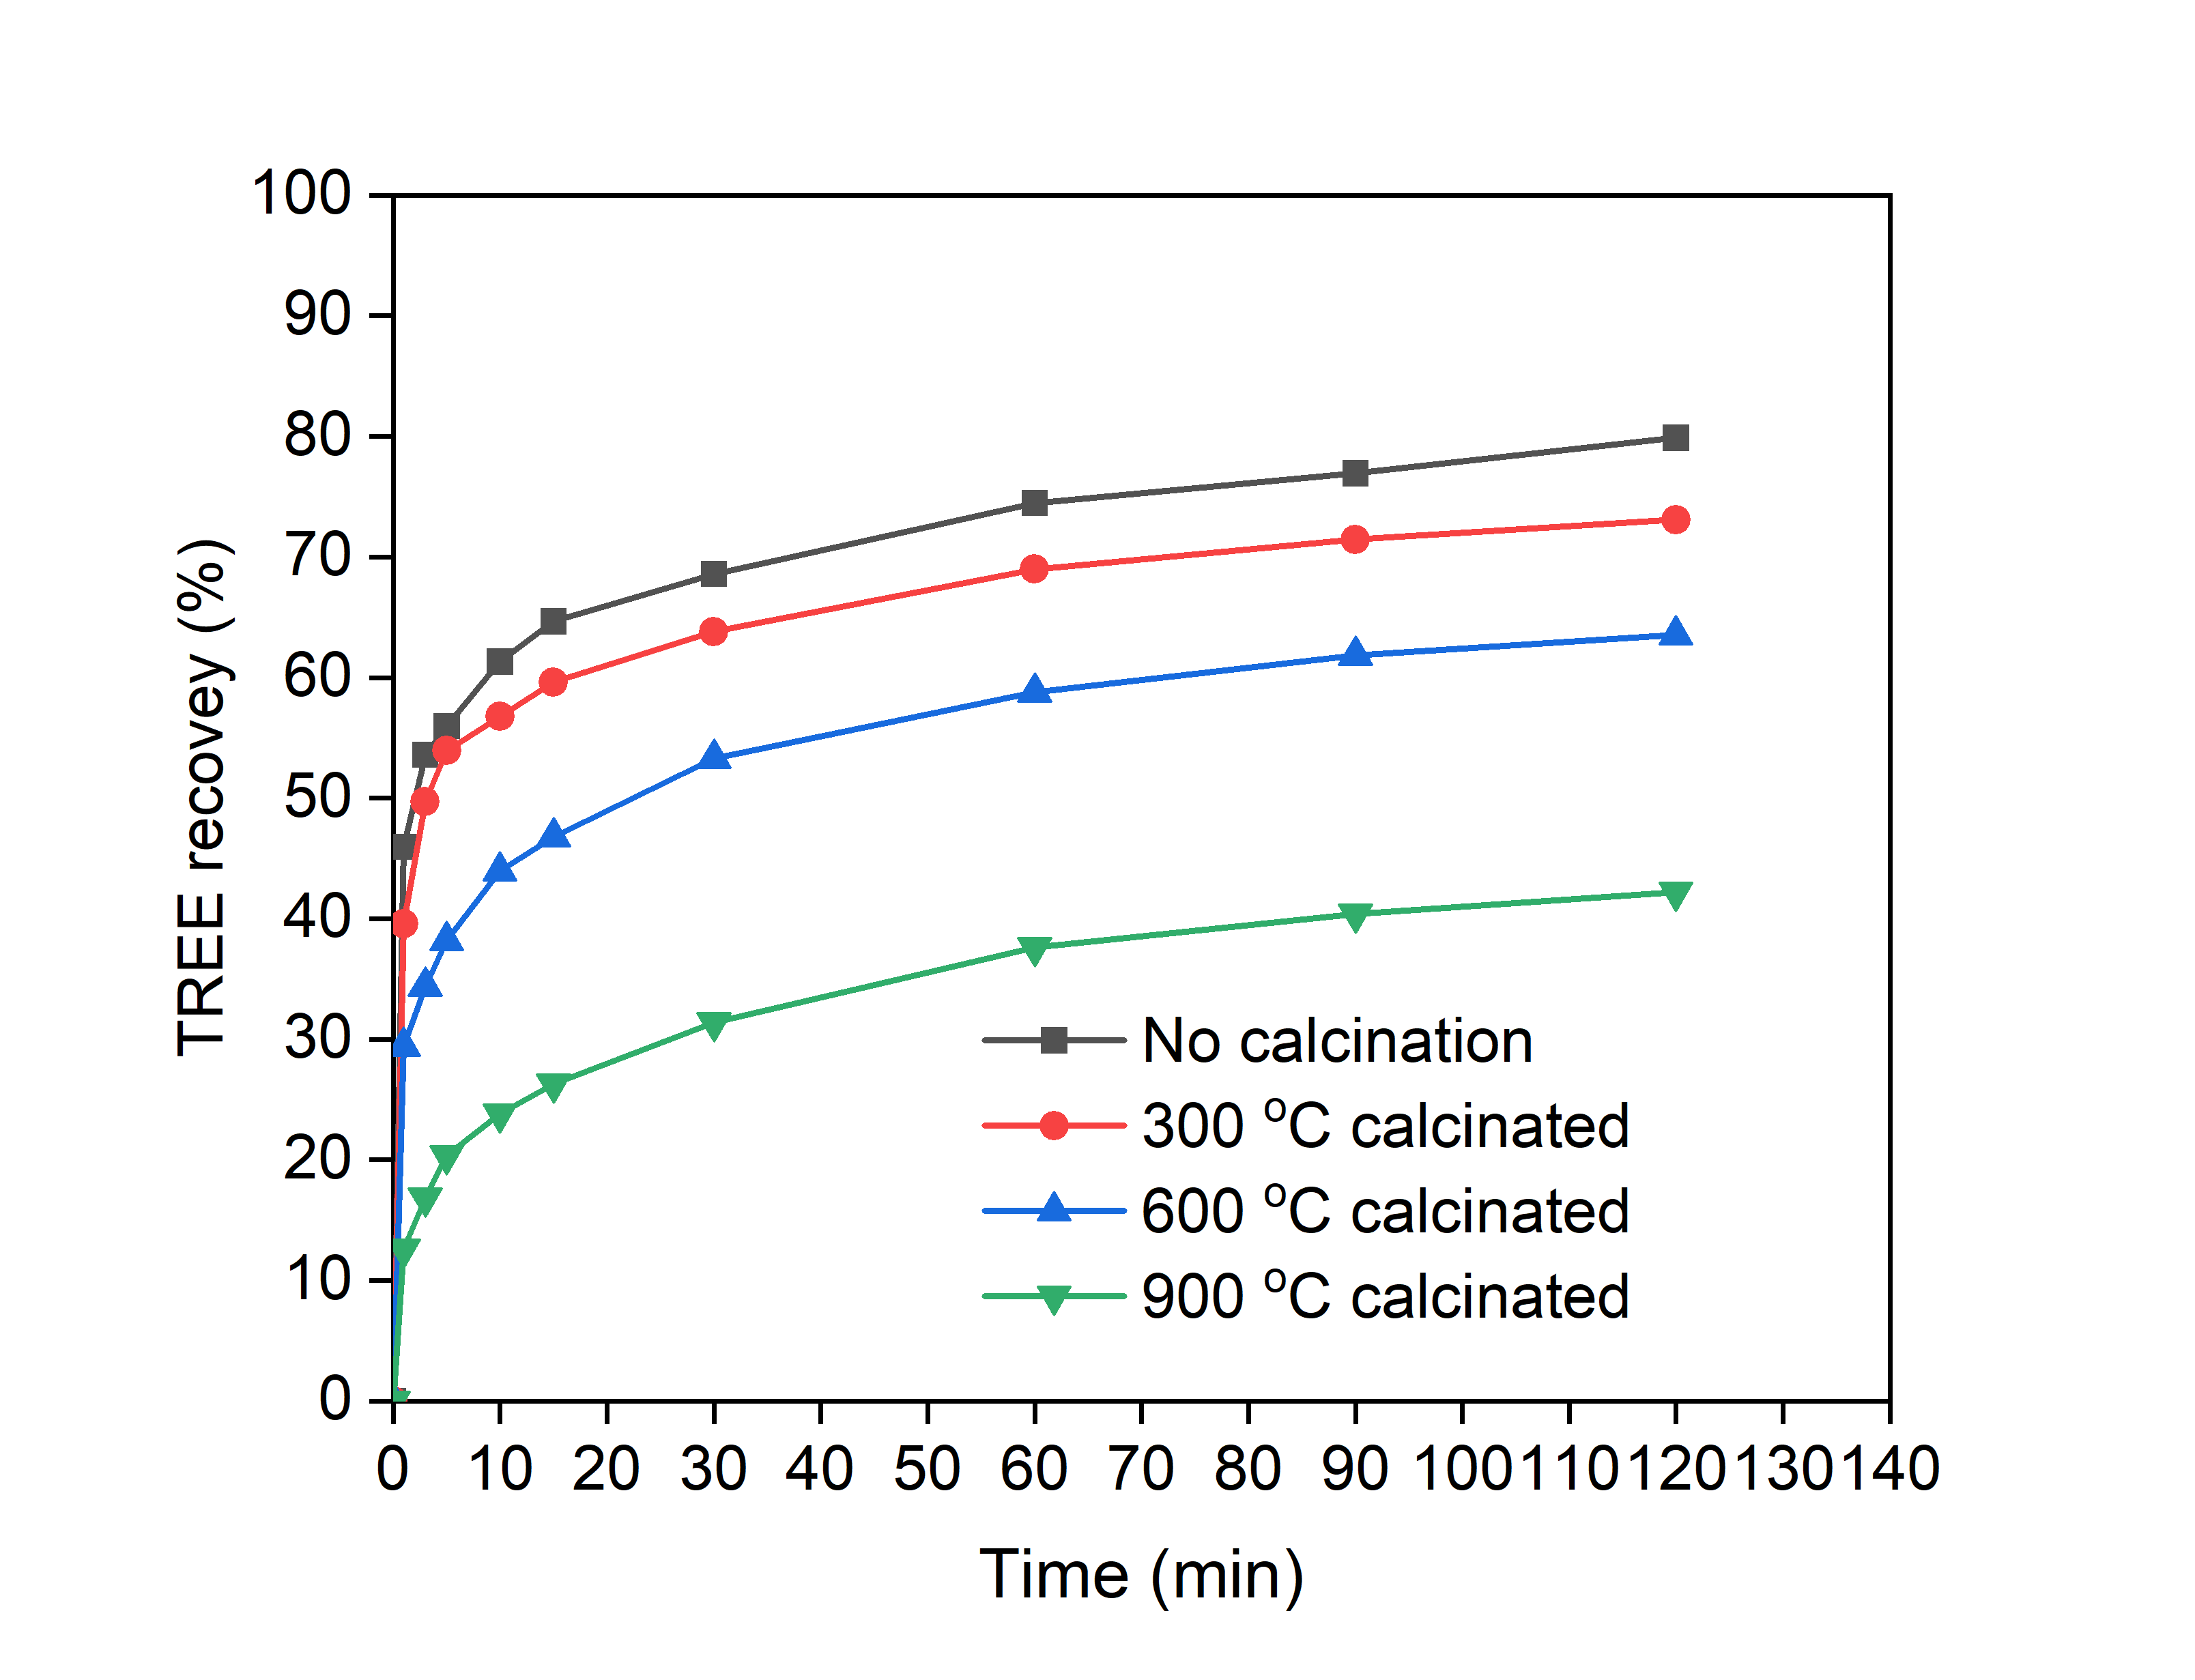 The effect of roasting on the recovery of REE from the allanite feed sample